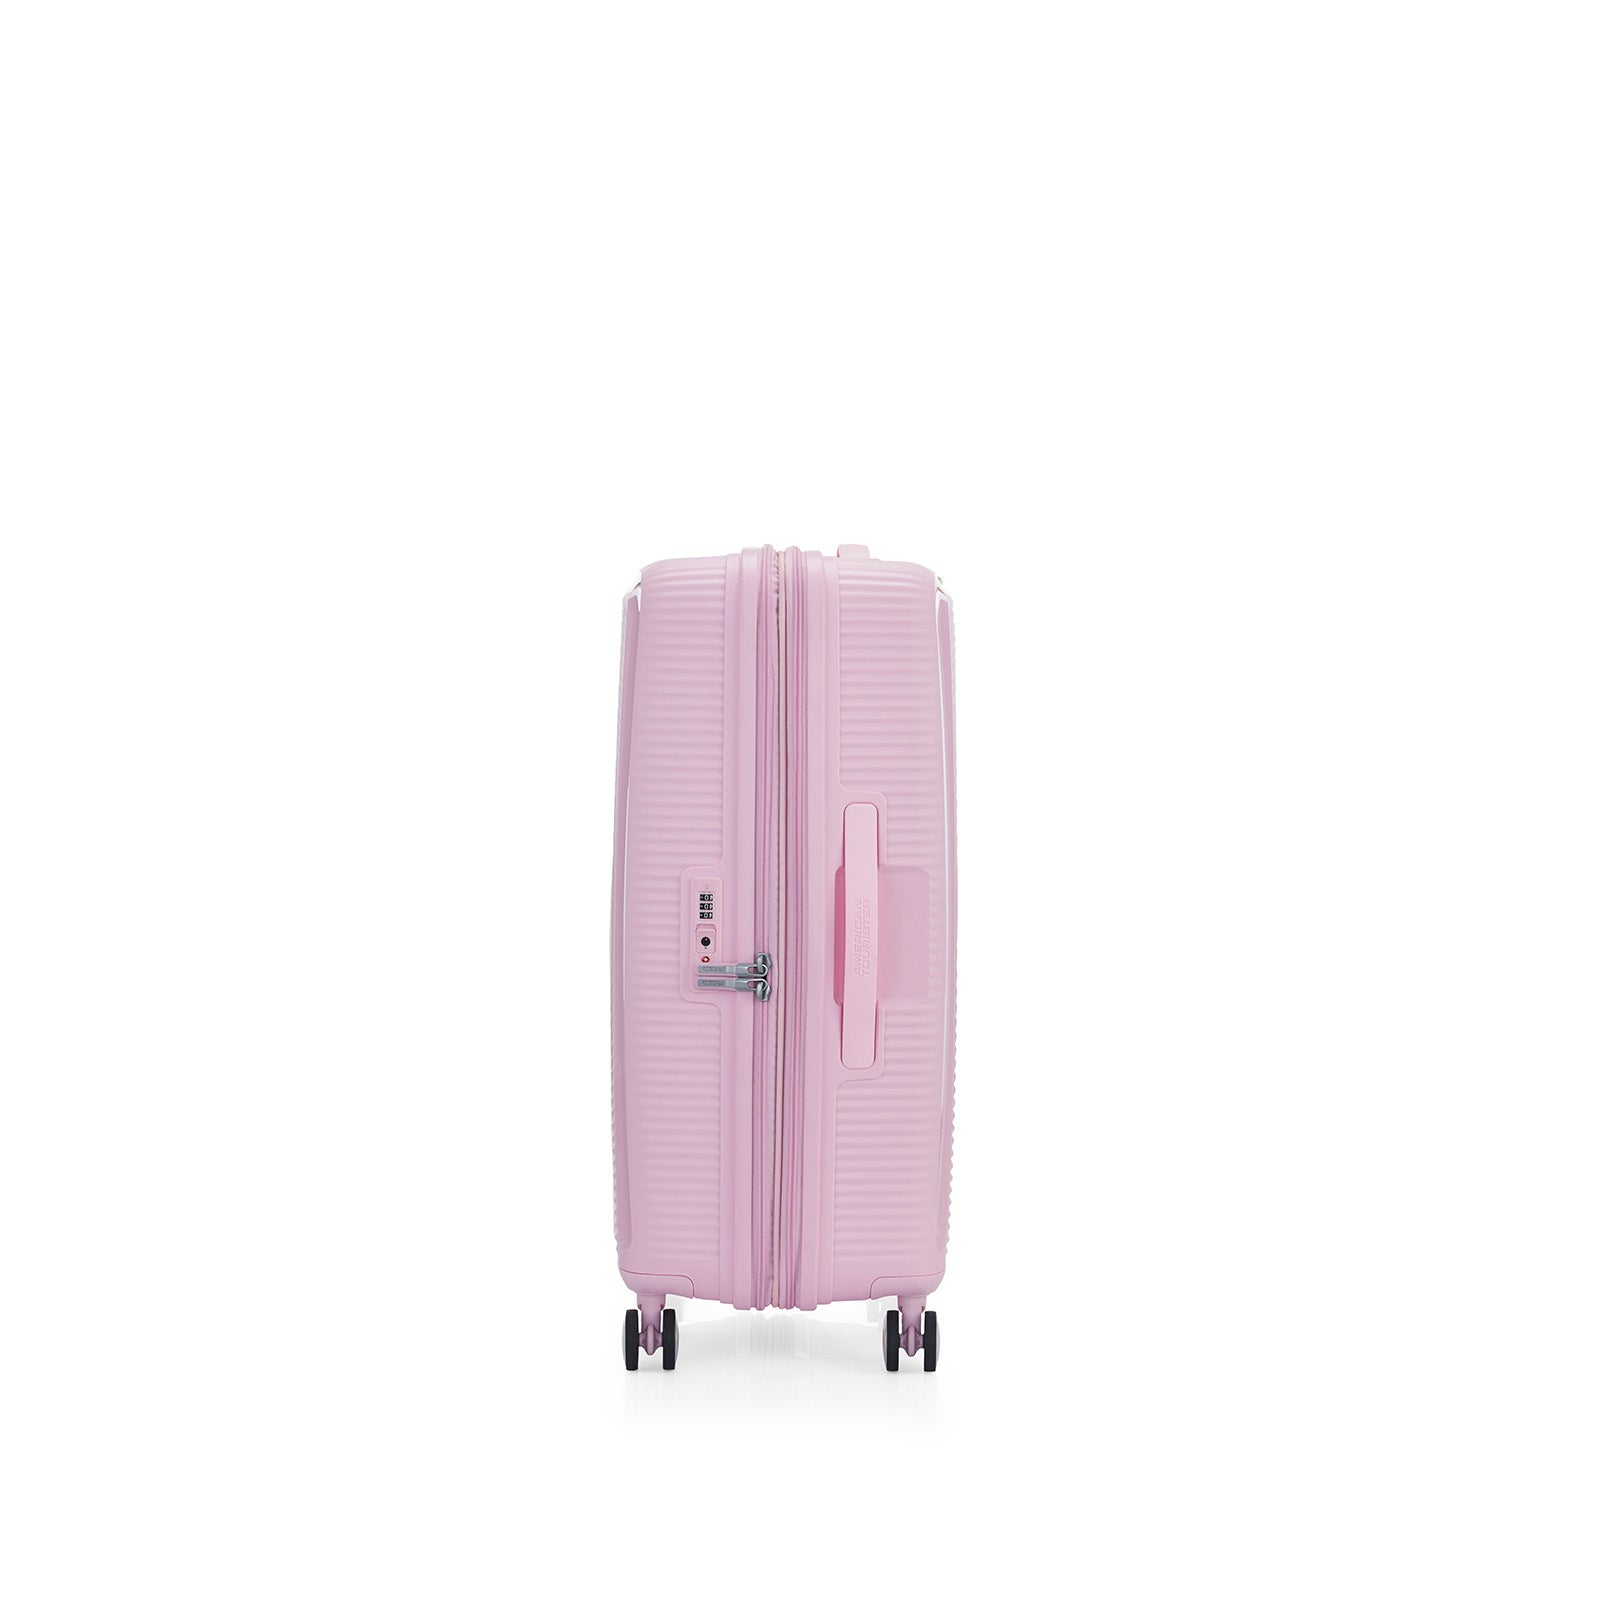 American-Tourister-Curio-2-69cm-Suitcase-Fresh-Pink-Side-Handle